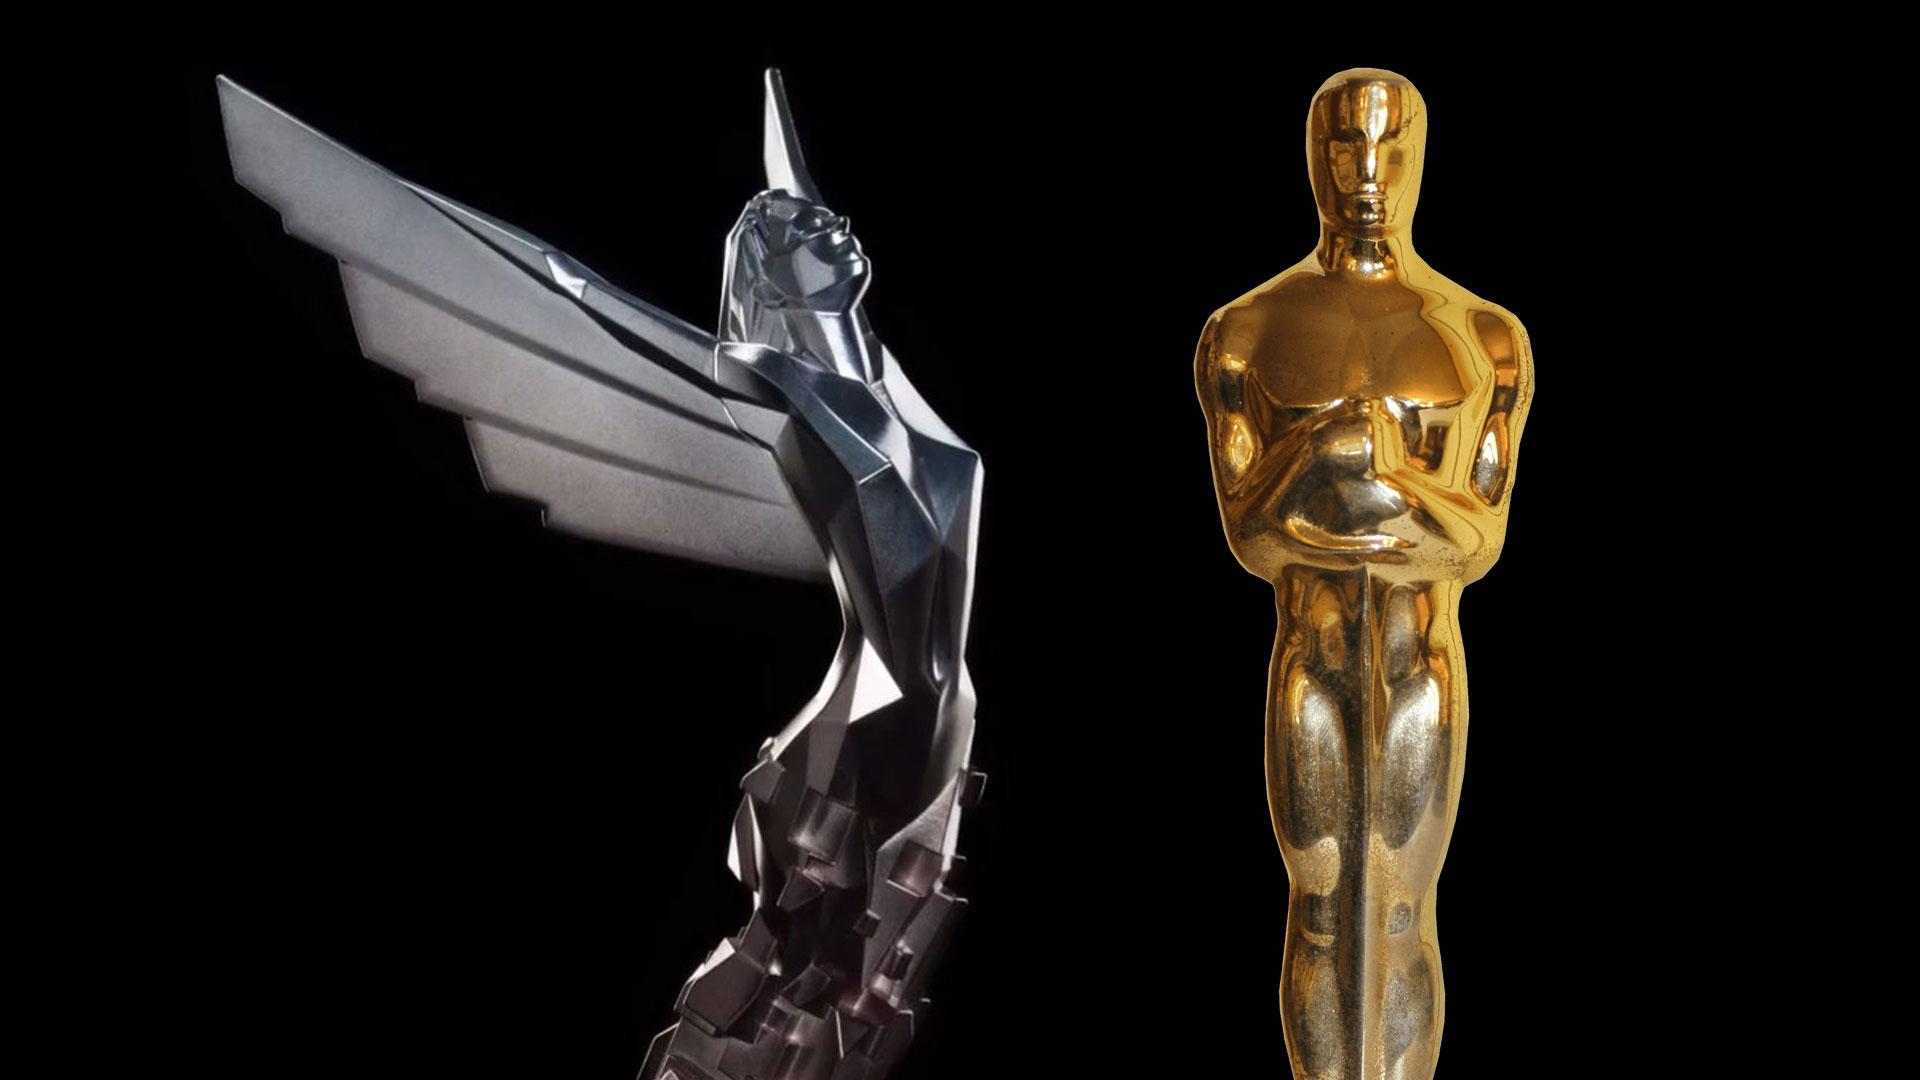 What The Oscars Can Learn from The Game Awards